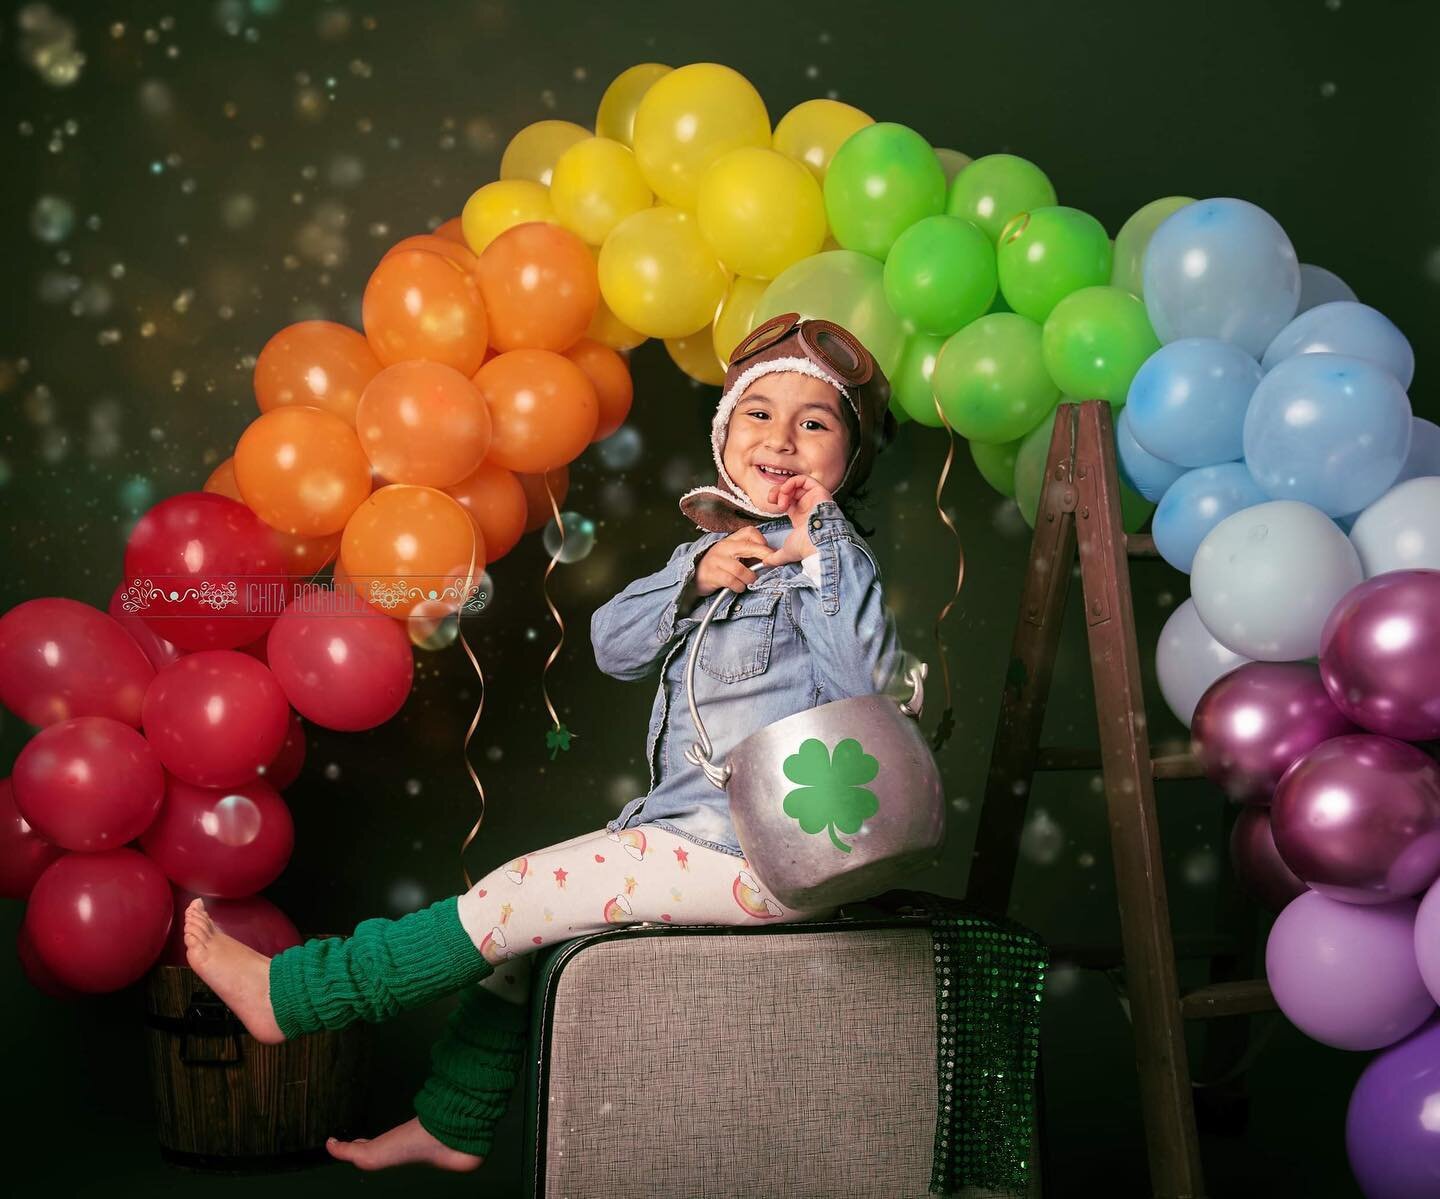 Open agenda for St Patrick&rsquo;s Micro Sessions 
3 edited pictures for 40 euros  4 euros extra digital up to 2 kids 
Extra kid 15 euros 
Until March the 19th #irish #irishinmadrid  #stpatricksday